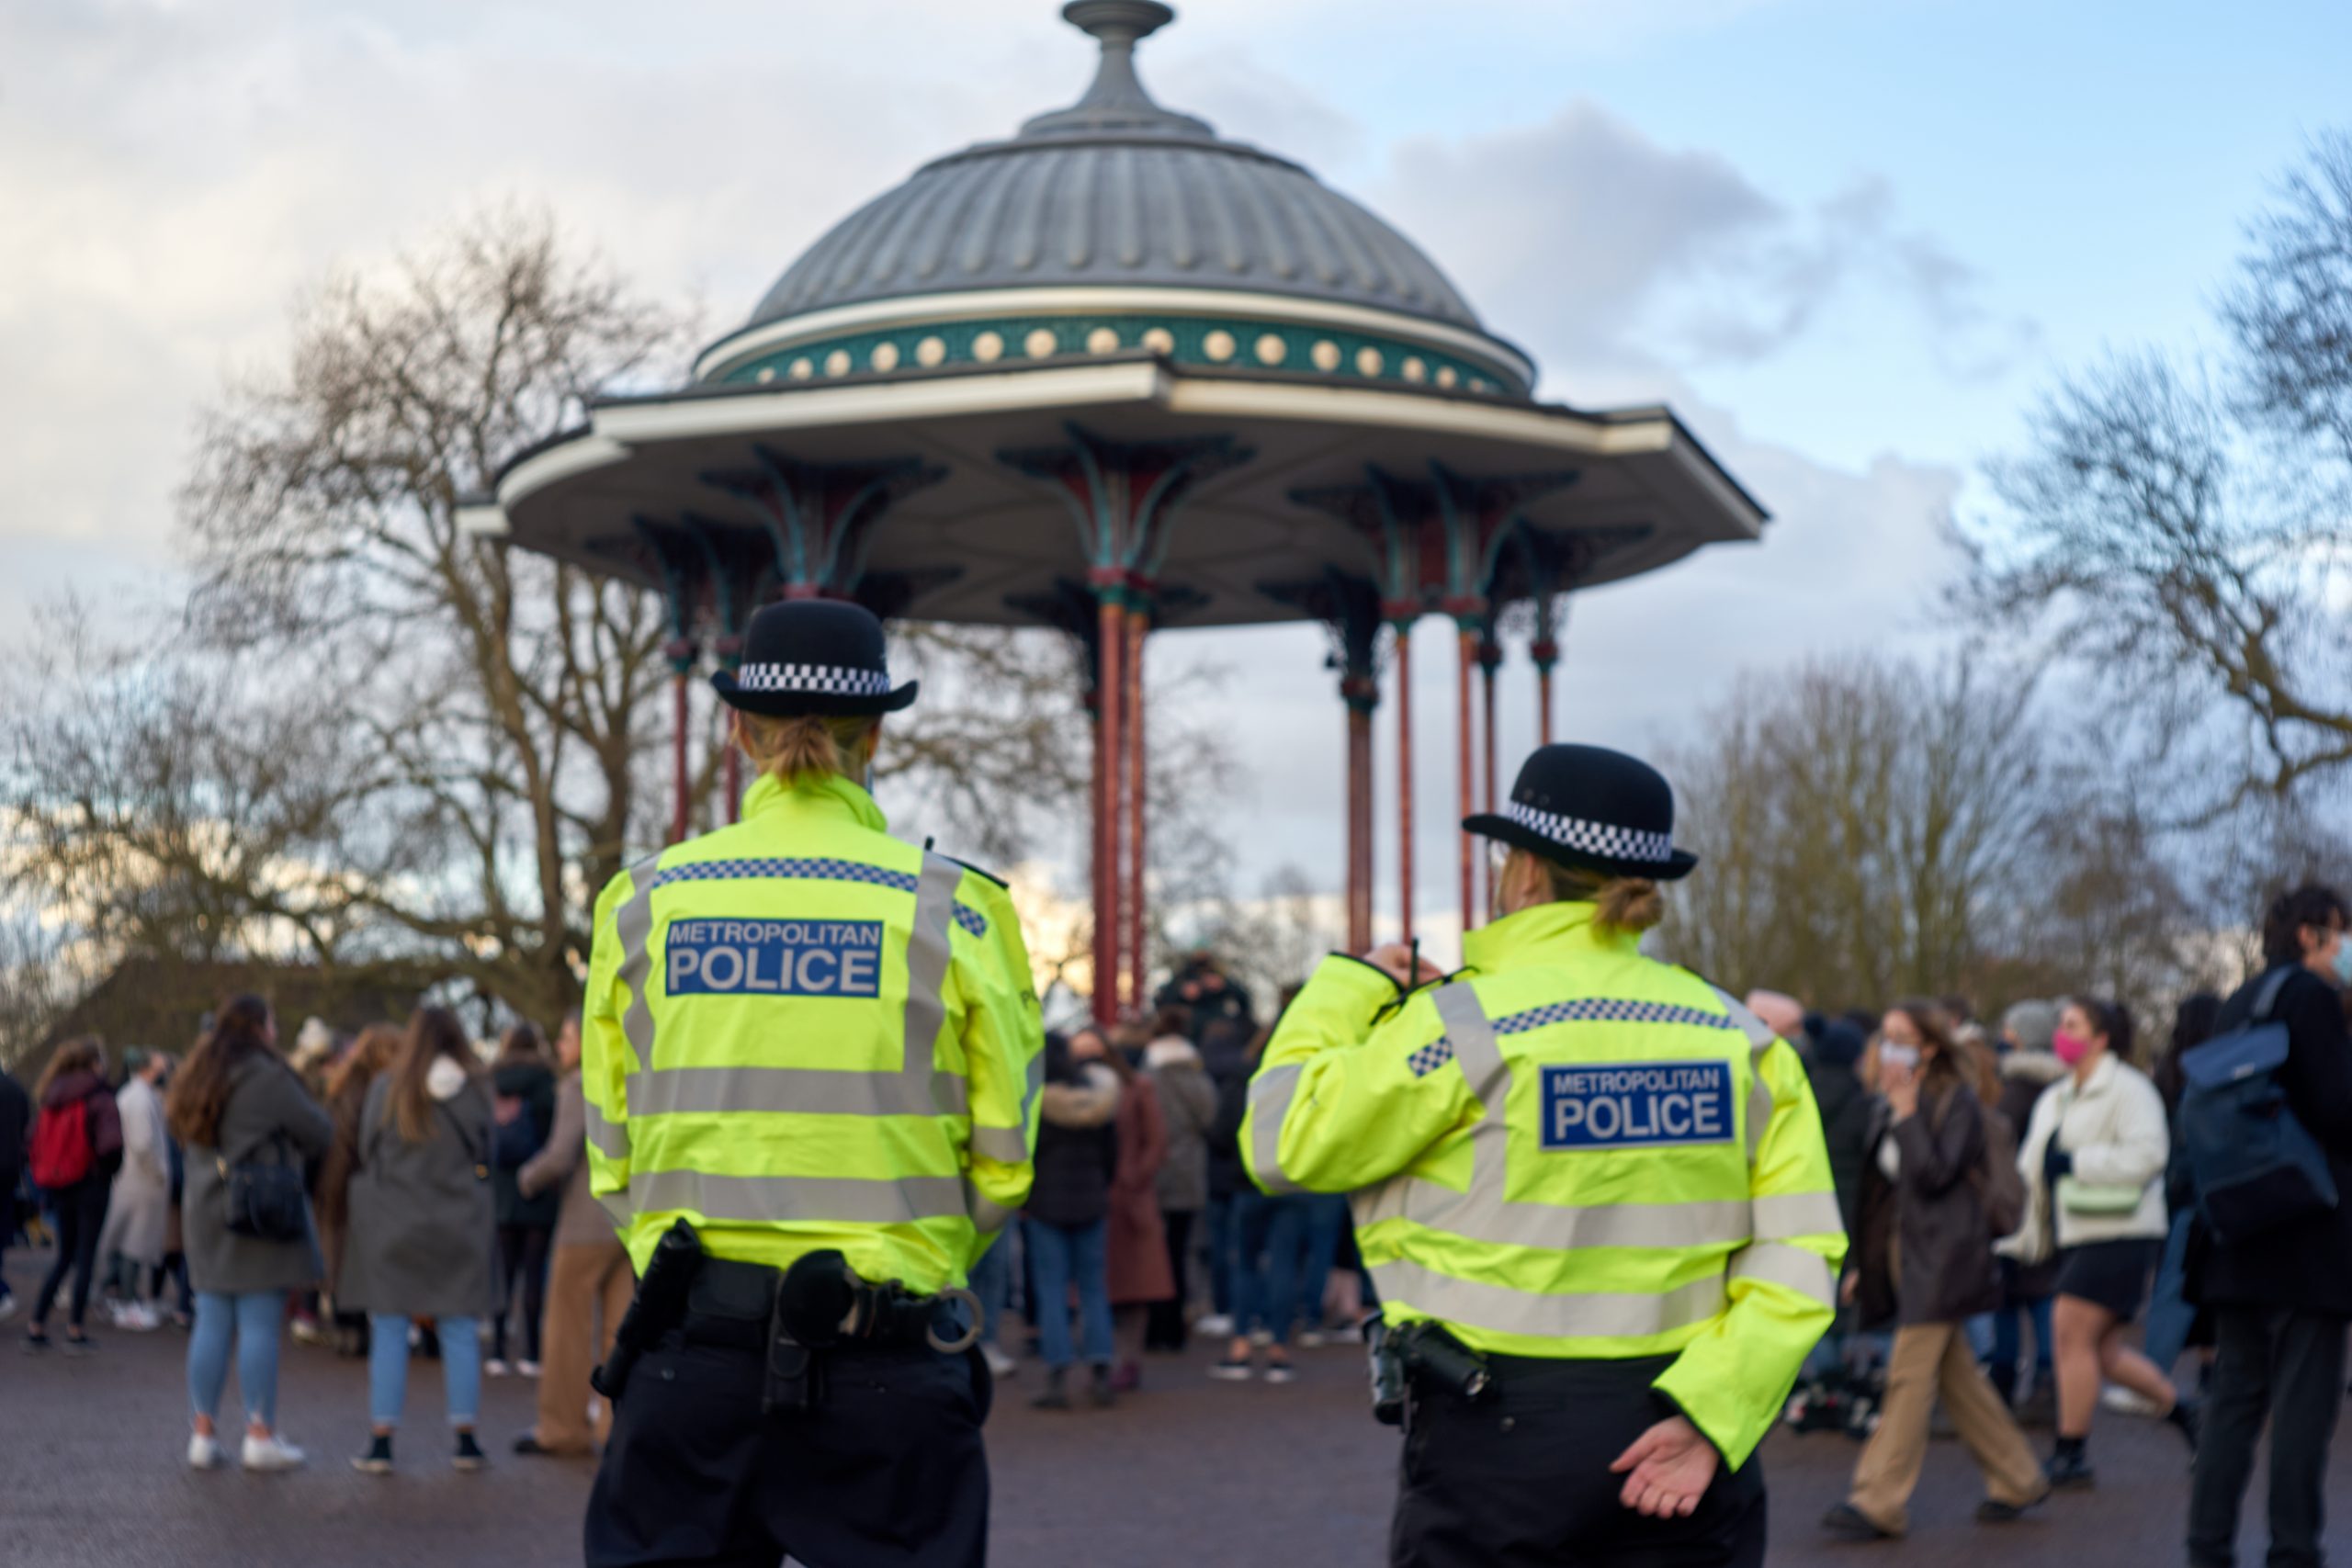 Police monitor a vigil organised for Sarah Everard in Clapham Common.